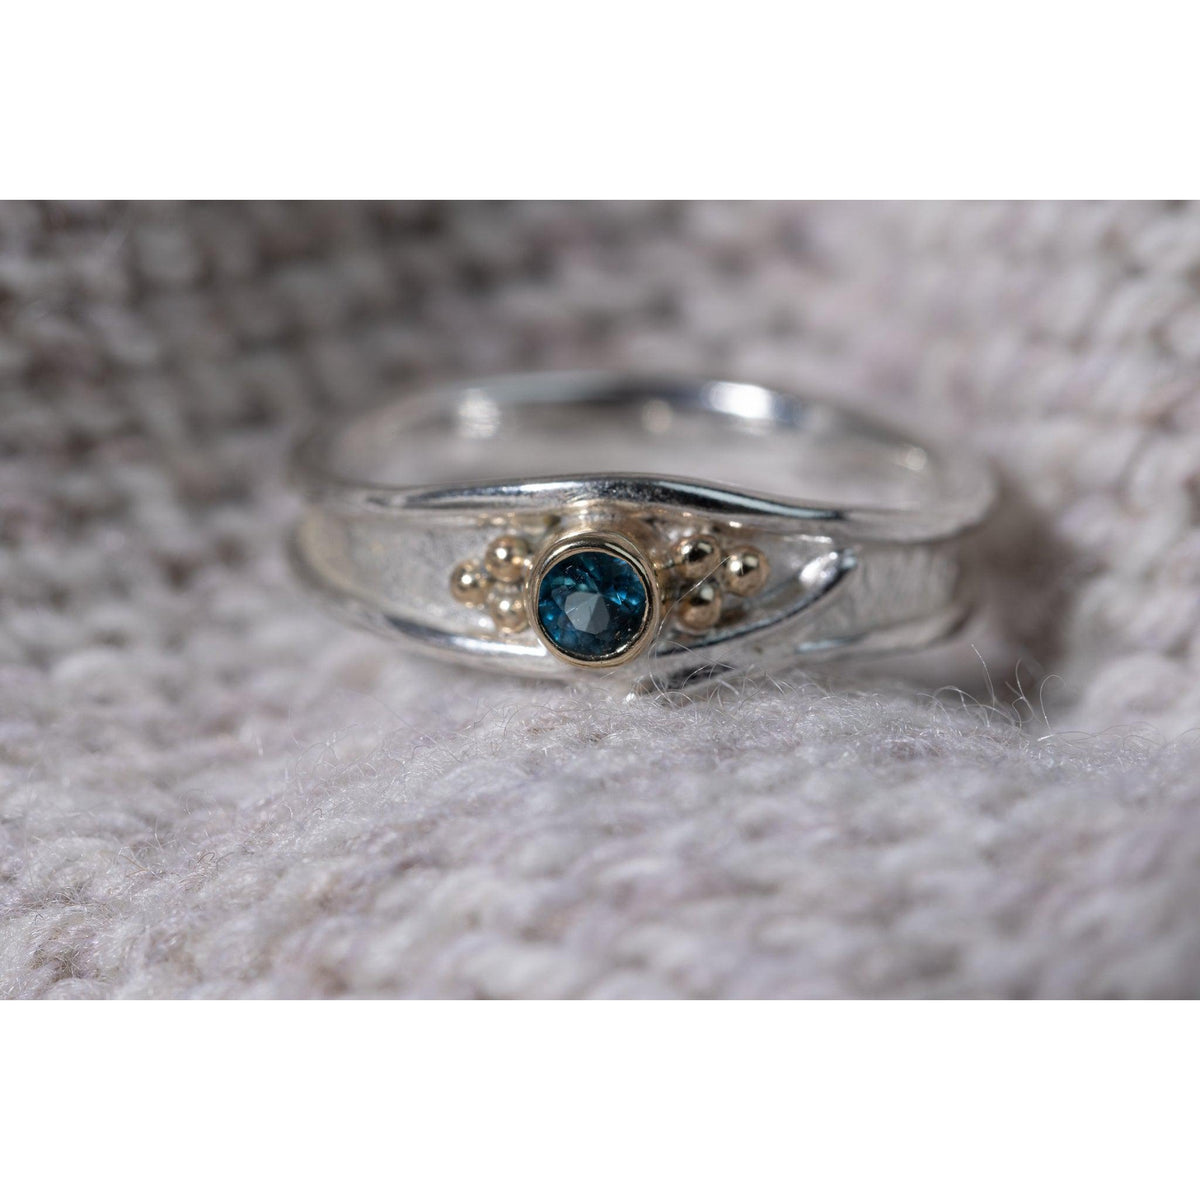 &#39;LG63 - Silver Ring with 9ct Gold 3mm London Blue Topaz Ring &#39; by Les Grimshaw, available at Padstow Gallery, Cornwall